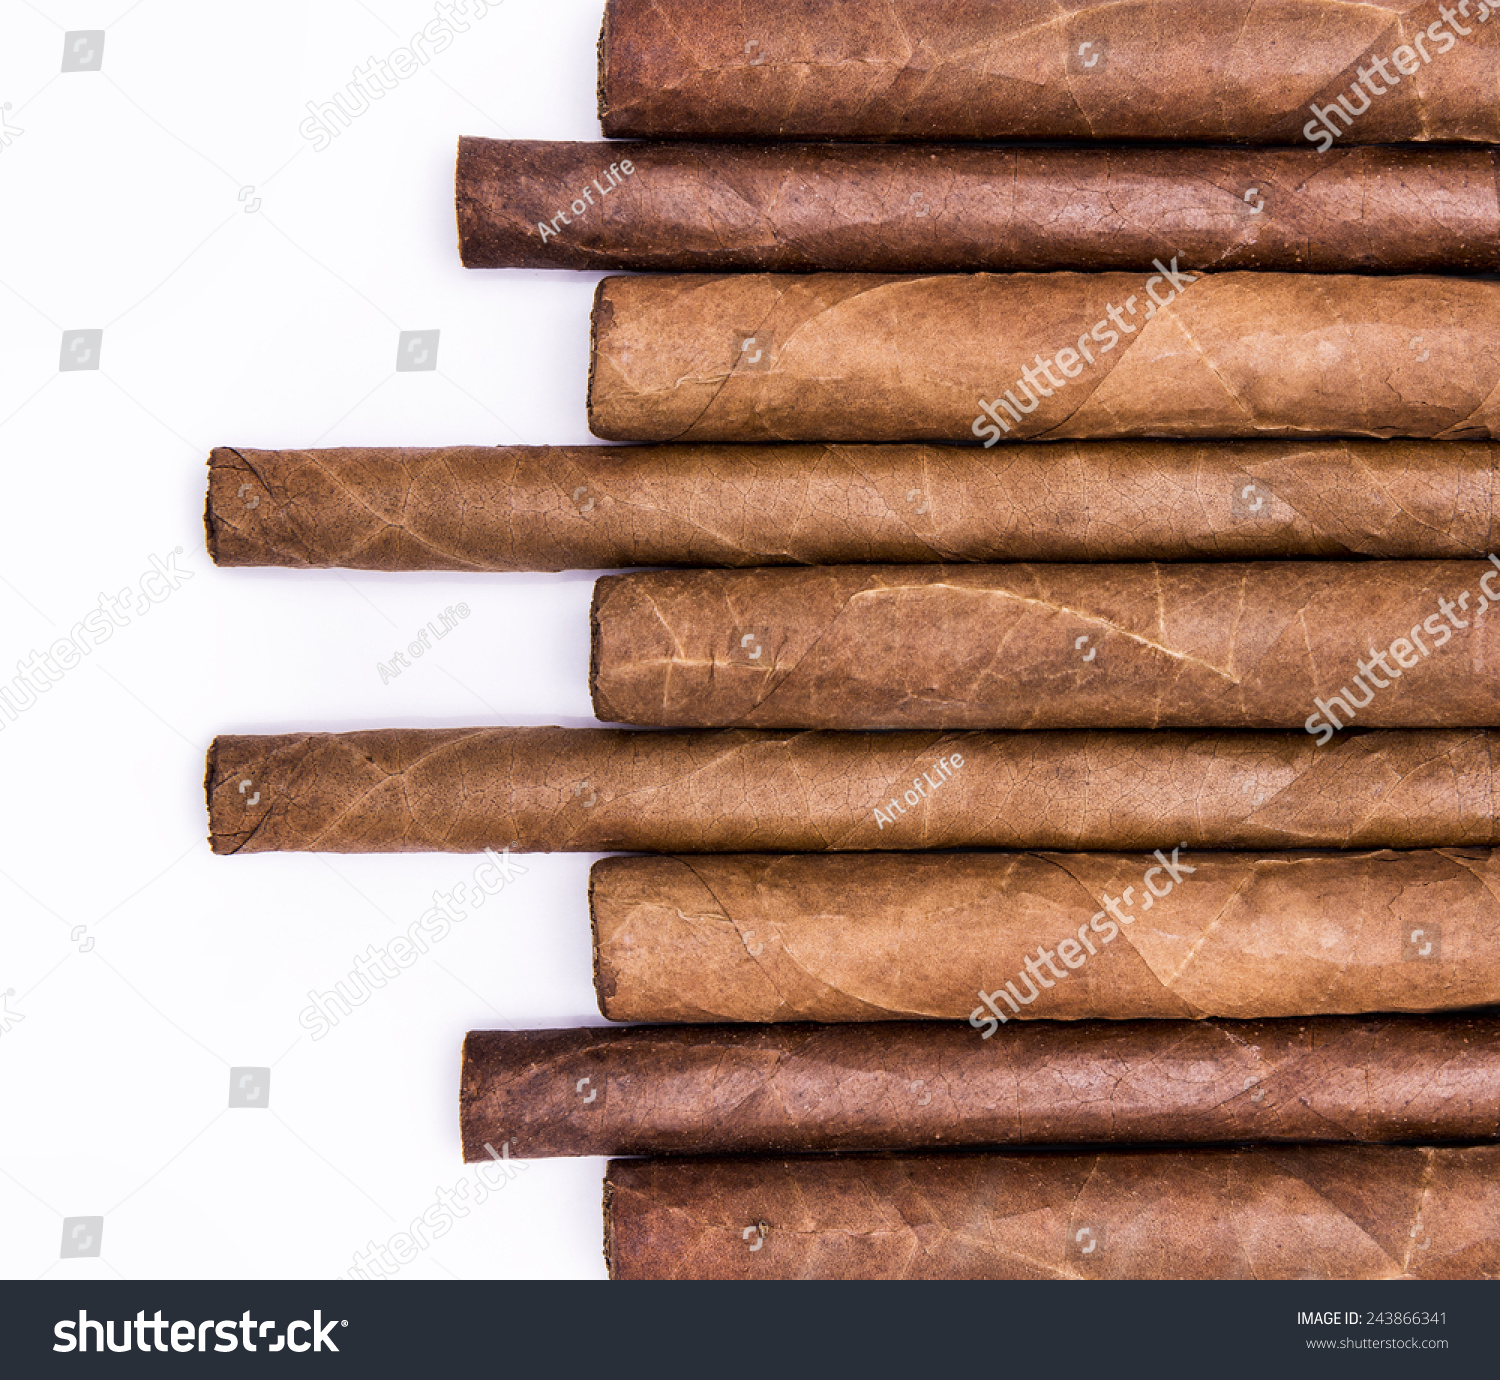 Cigars Row Space Text Closeup Background Stock Photo 243866341 ...